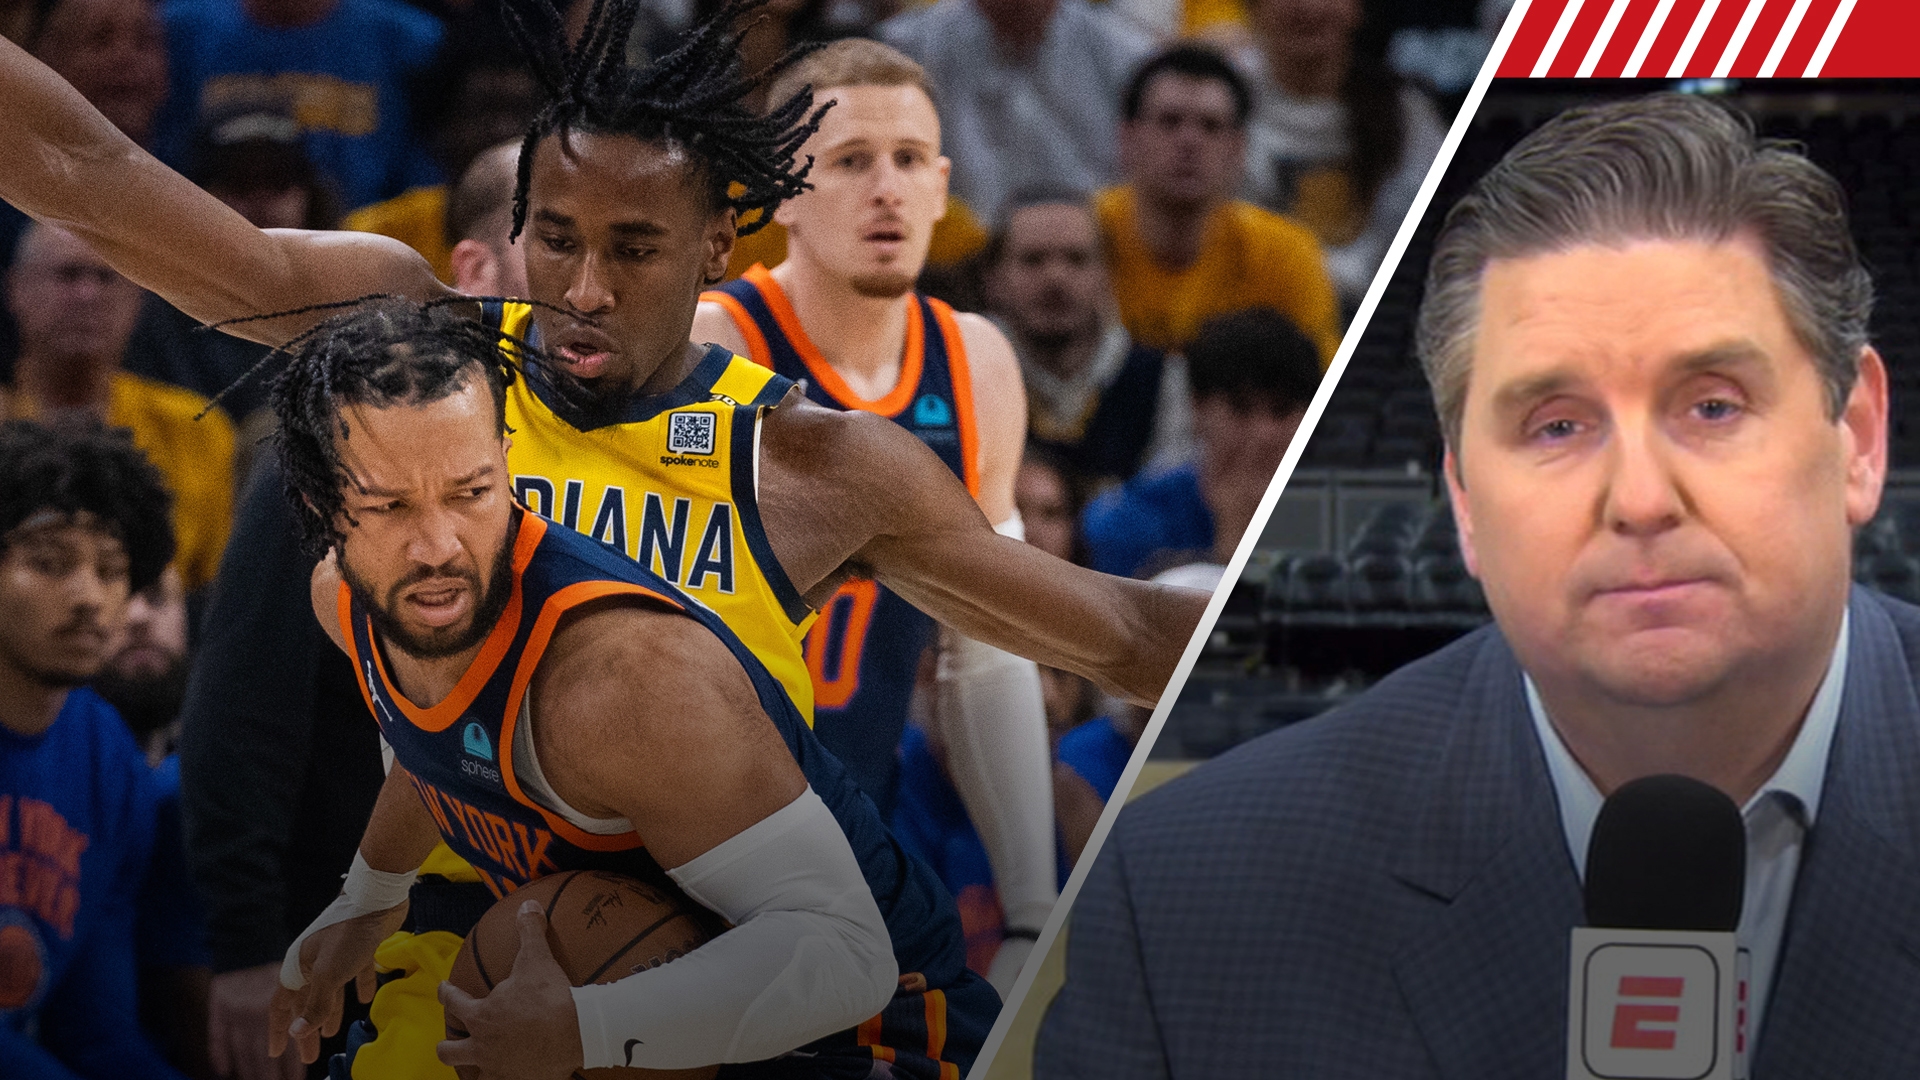 Windhorst pinpoints how Pacers flipped momentum in series vs. Knicks